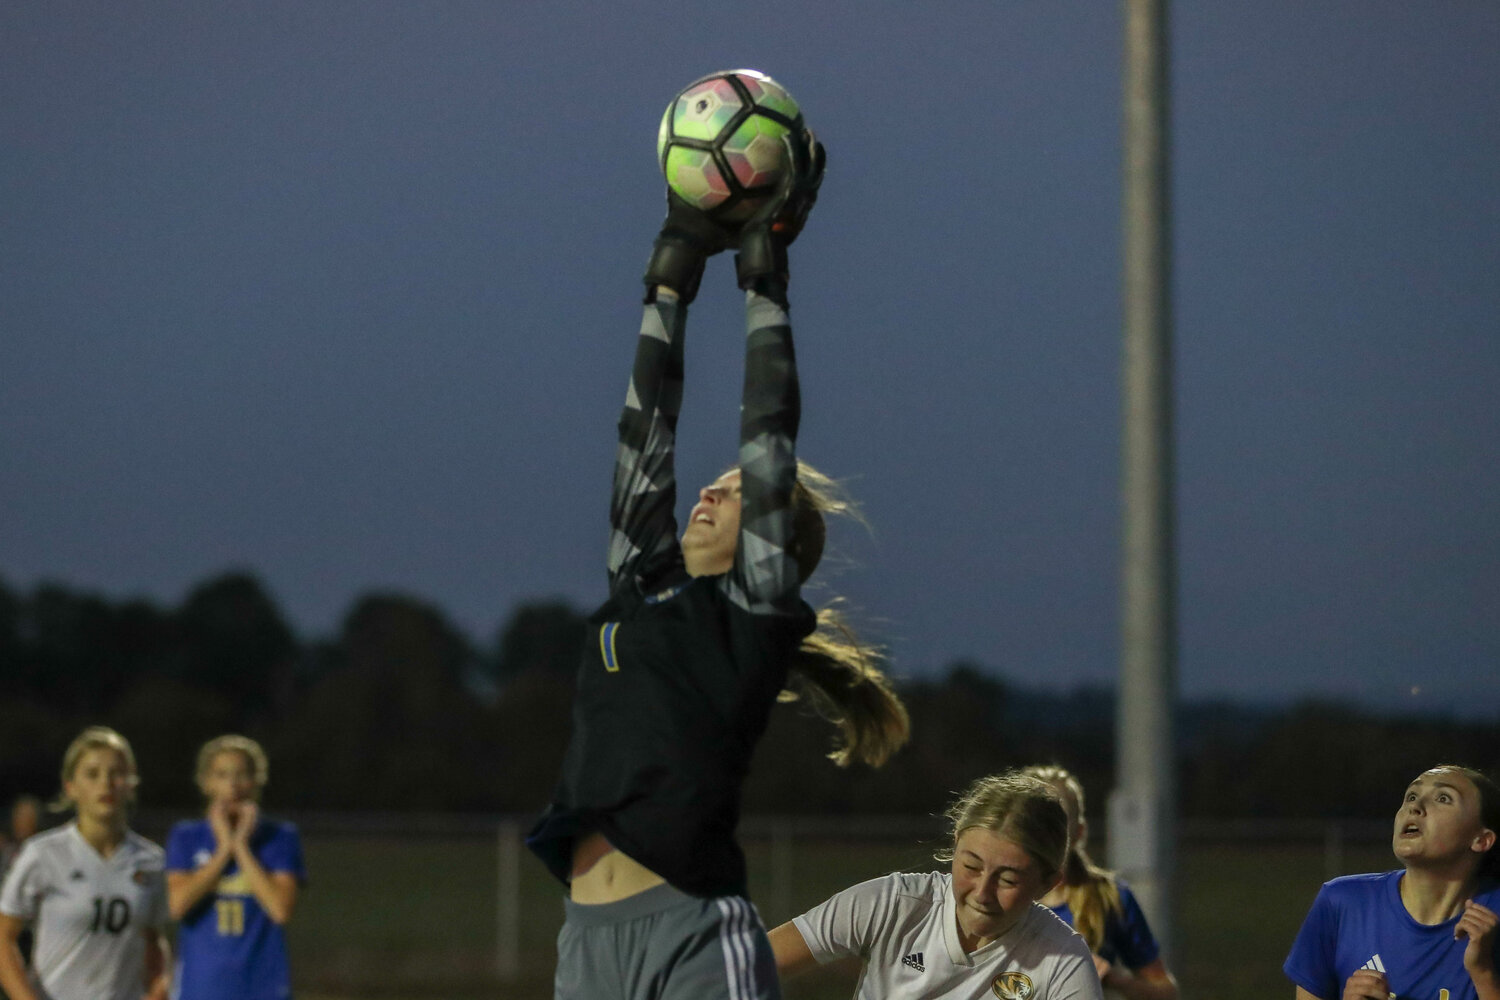 Adna keeper Jordanne Moon goes up to snag a cross late in the Pirates' 1-1 draw with Napavine on Sept. 20.